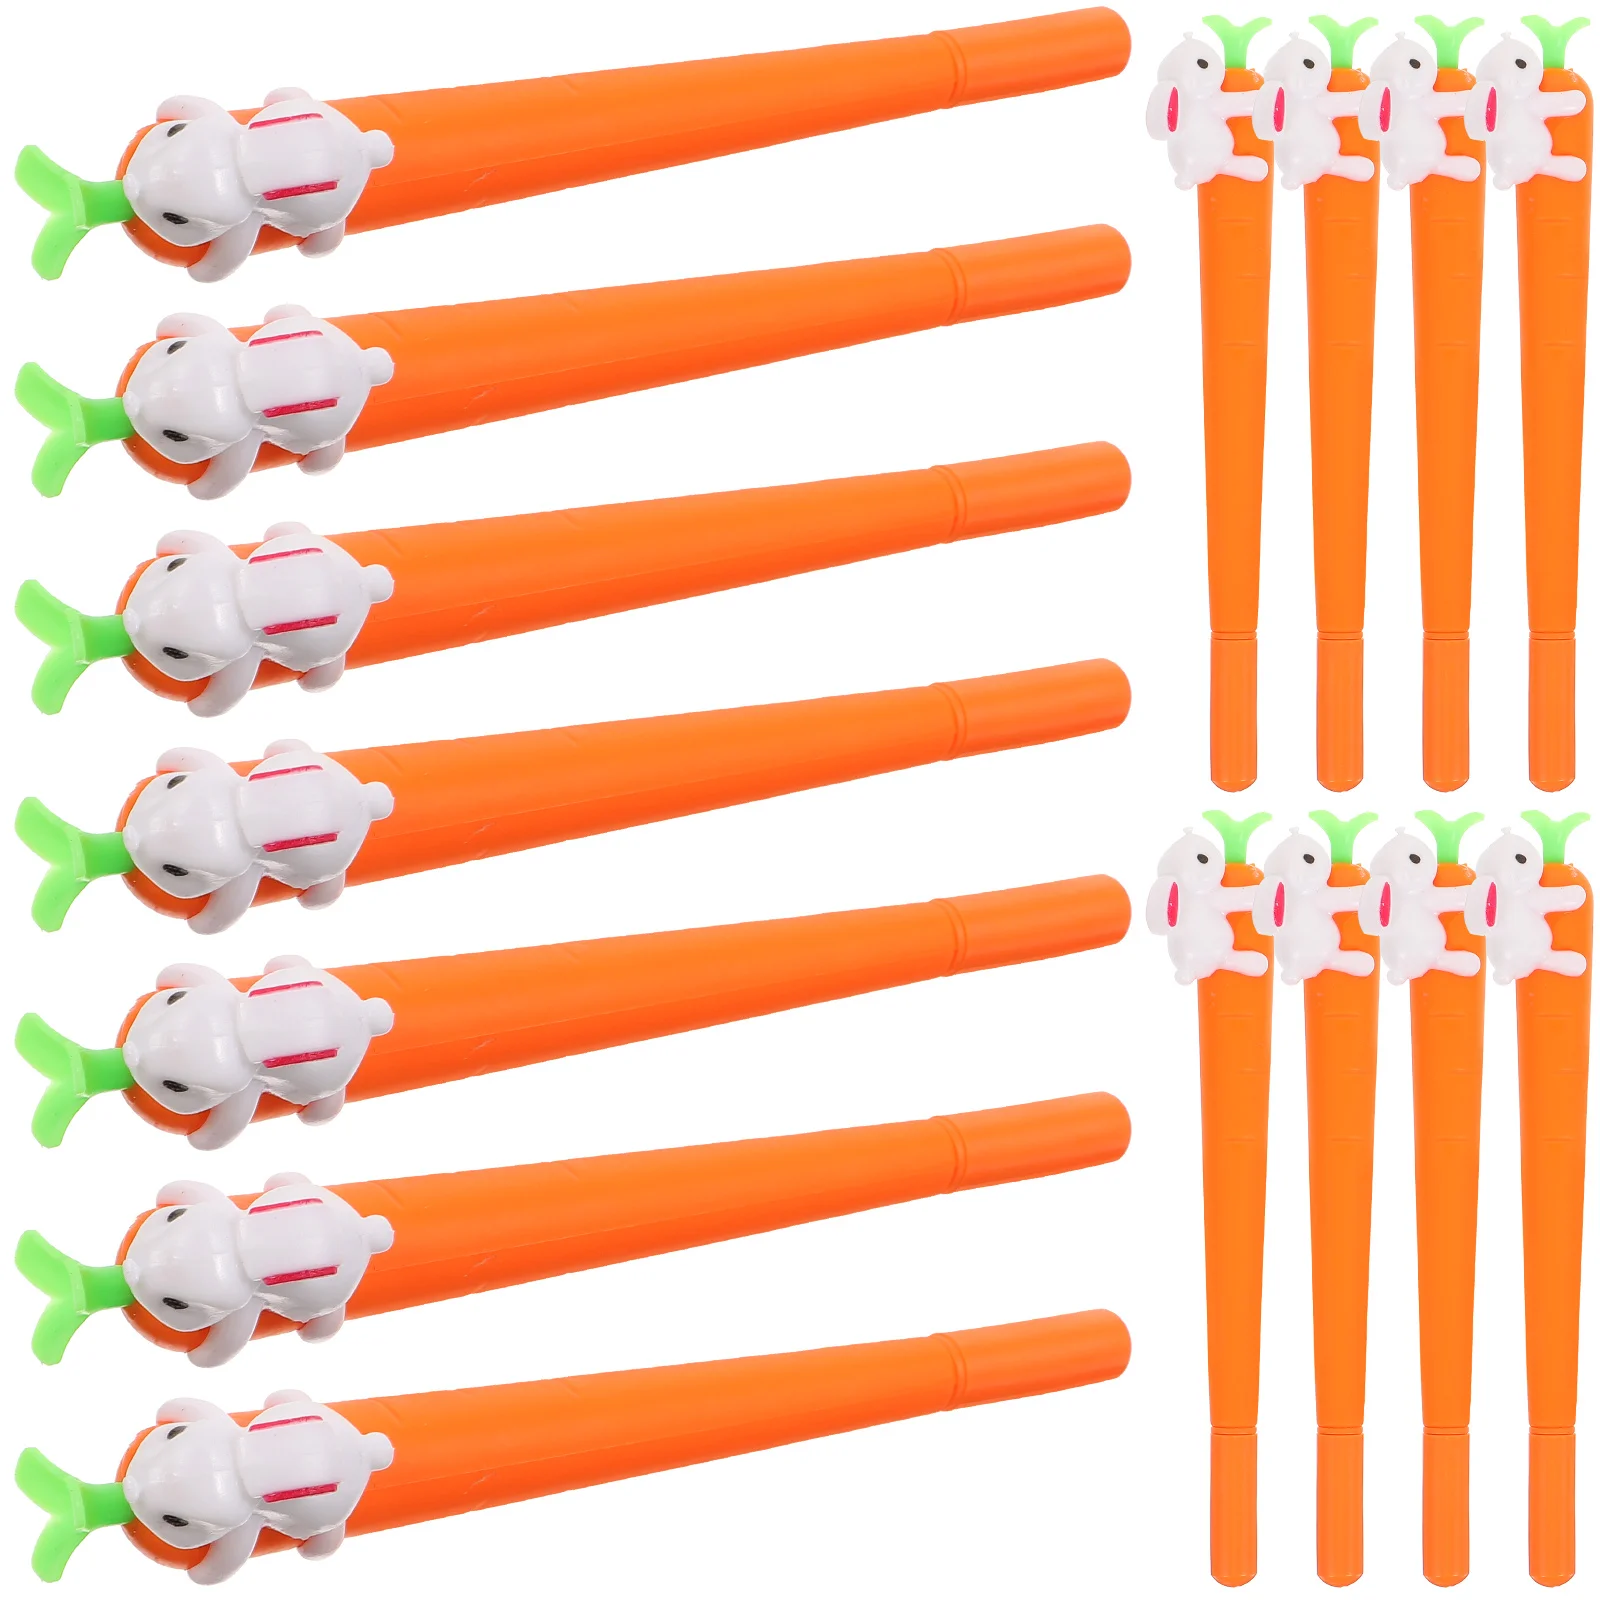 15 Pcs Carrot Pen Carrots Rabbit Pattern Stationery Gel Writing Silica Ink Shape Pens Student 05mm ice skates hockey figure guards pattern silica gel blades covers child professional accessory